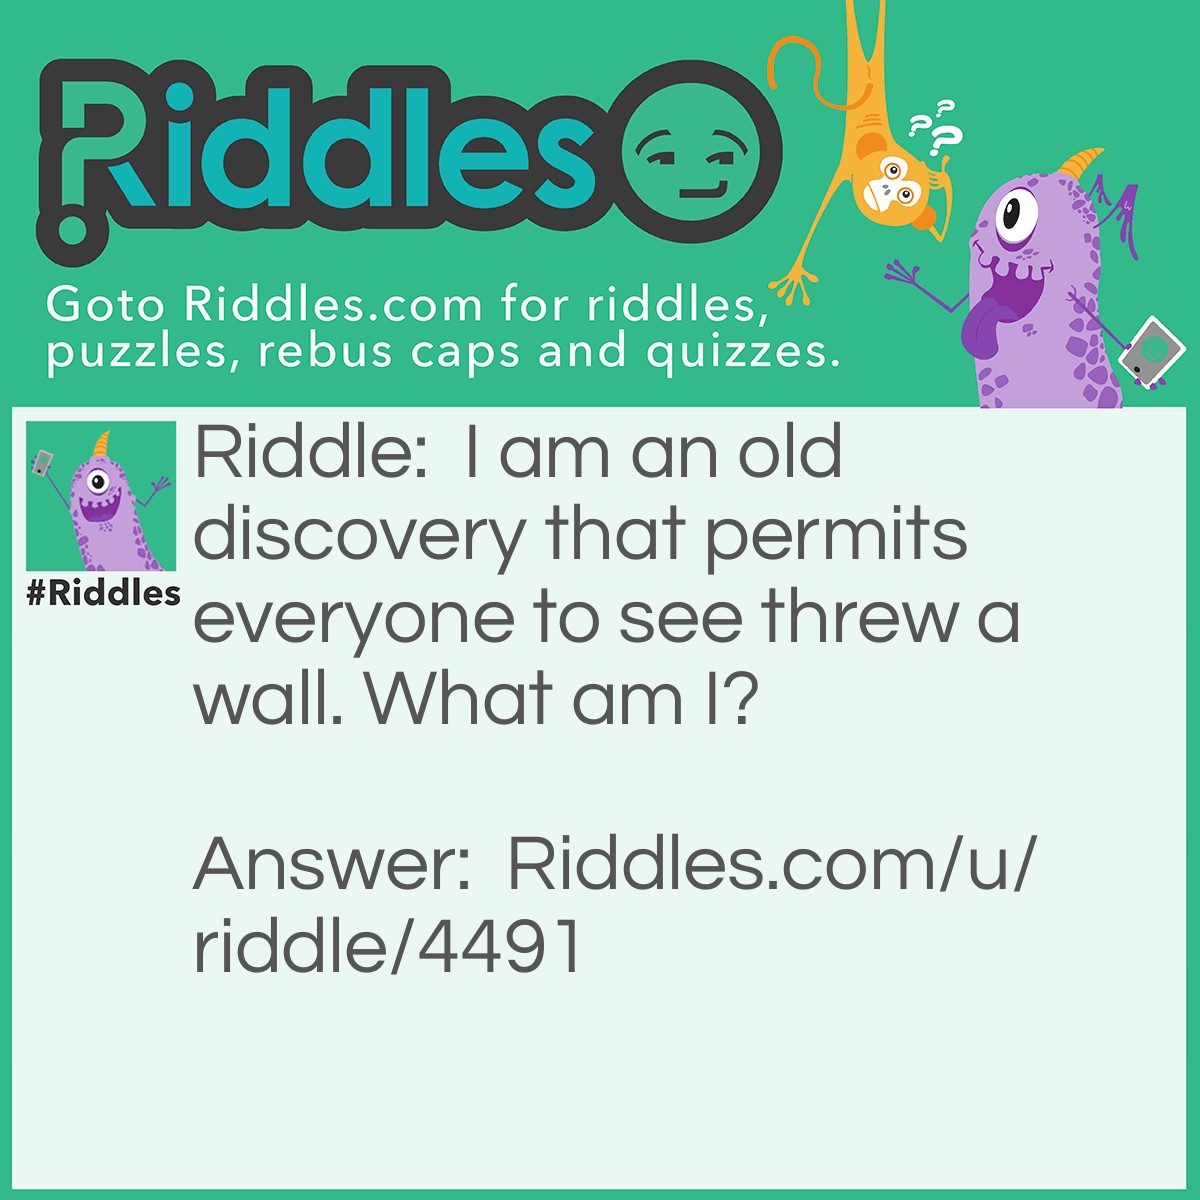 Riddle: I am an old discovery that permits everyone to see threw a wall. What am I? Answer: A window.